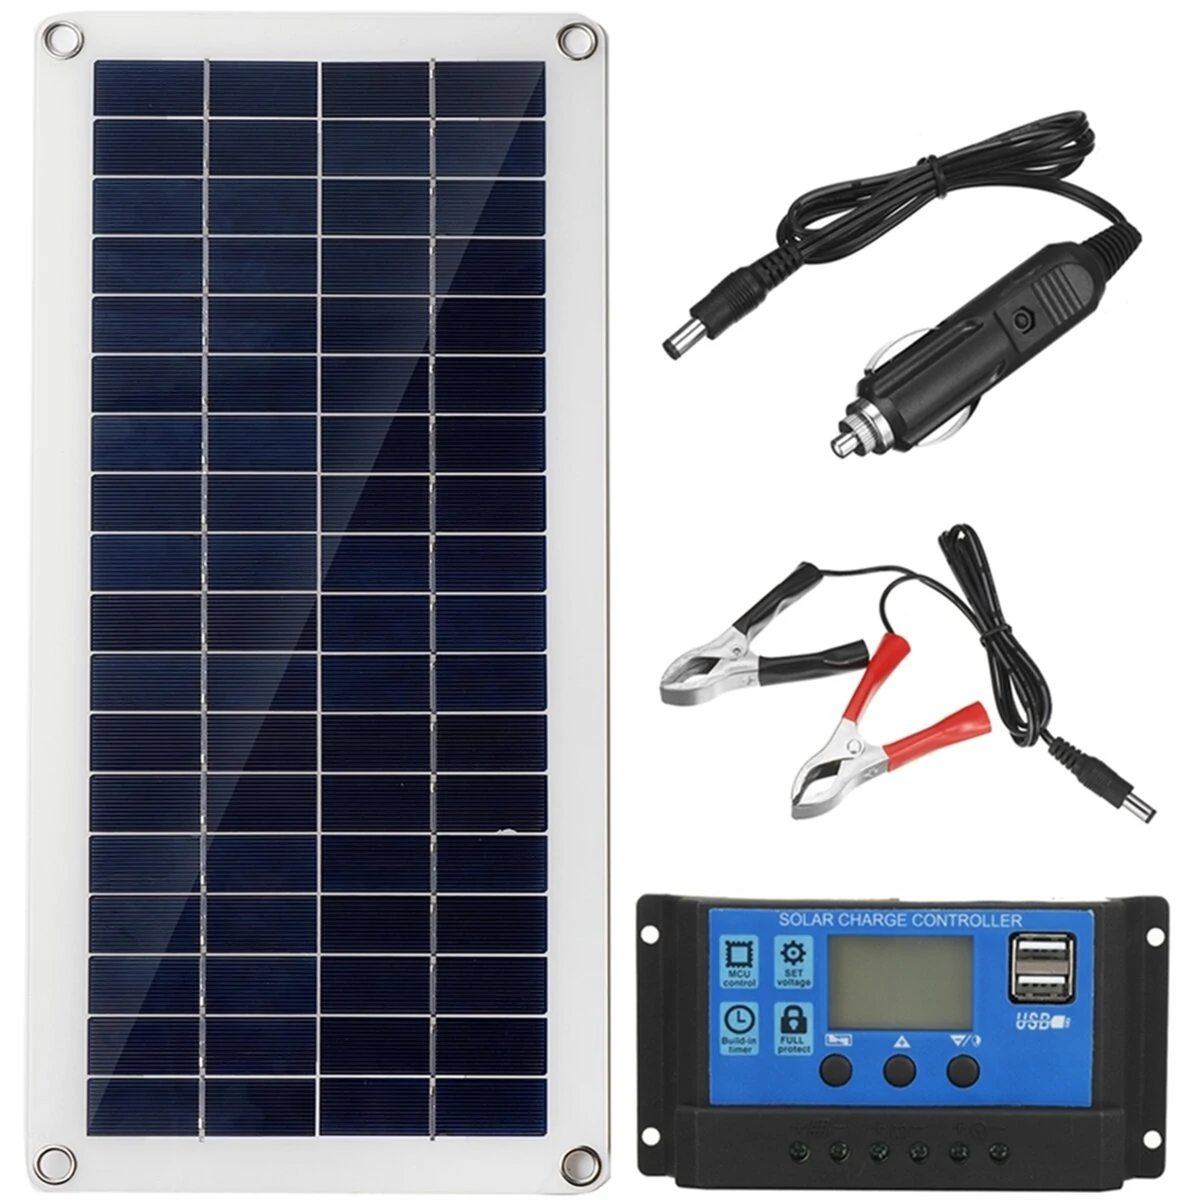 40W 12V Solar Panel Kit 60A 100A Battery Charger Controller Camping RV Caravan Boat